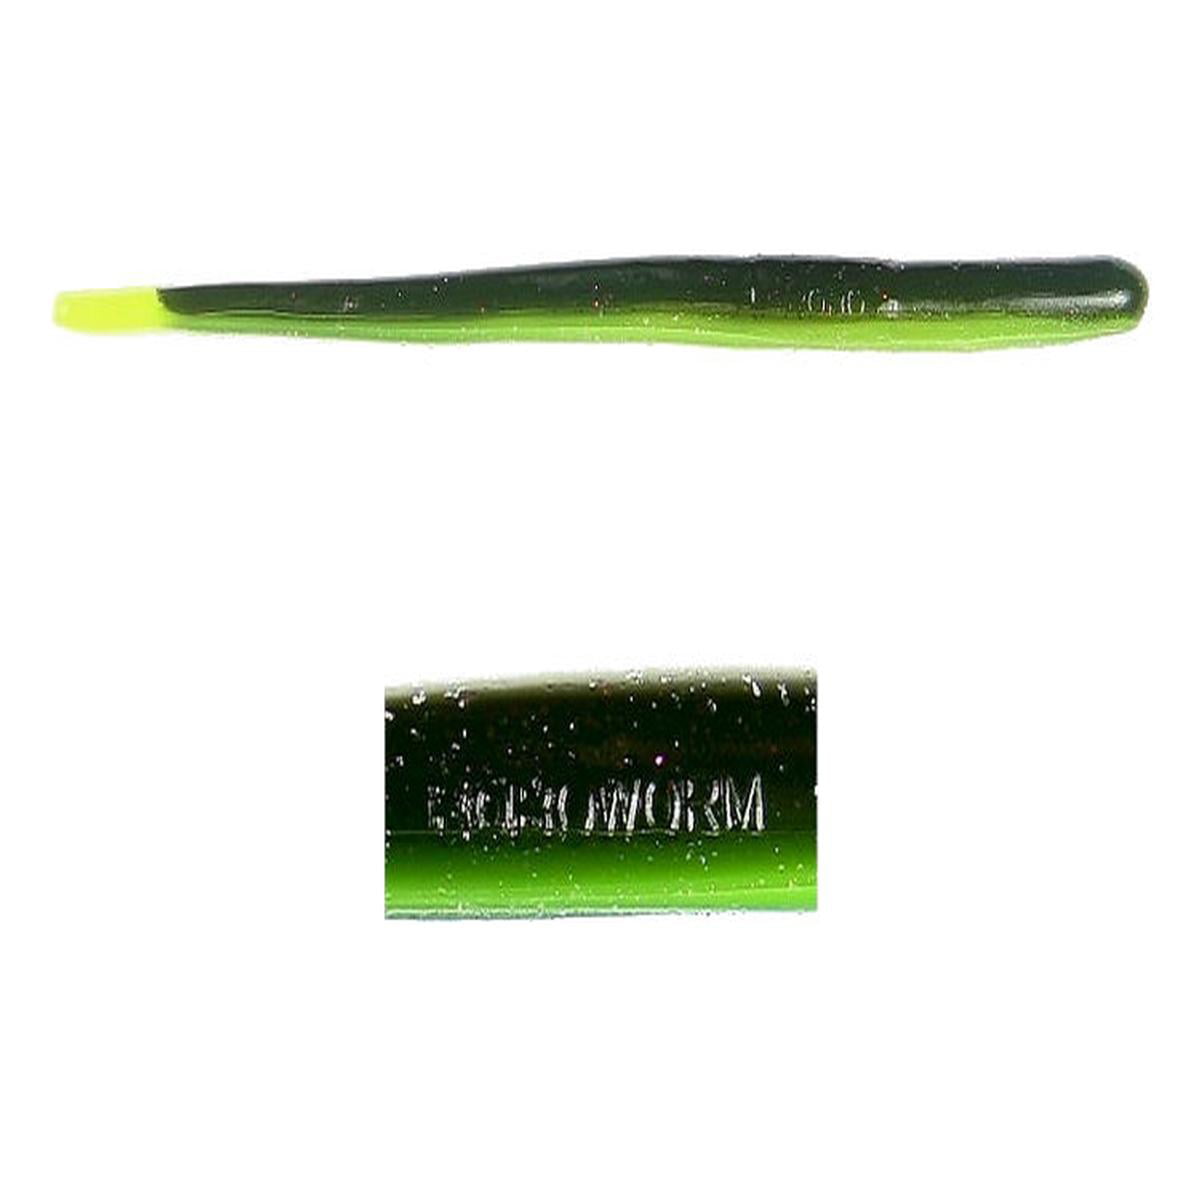 Roboworm 4 1/2 Finesse Straight Tail Worm Fishing Lure, Pumpkin